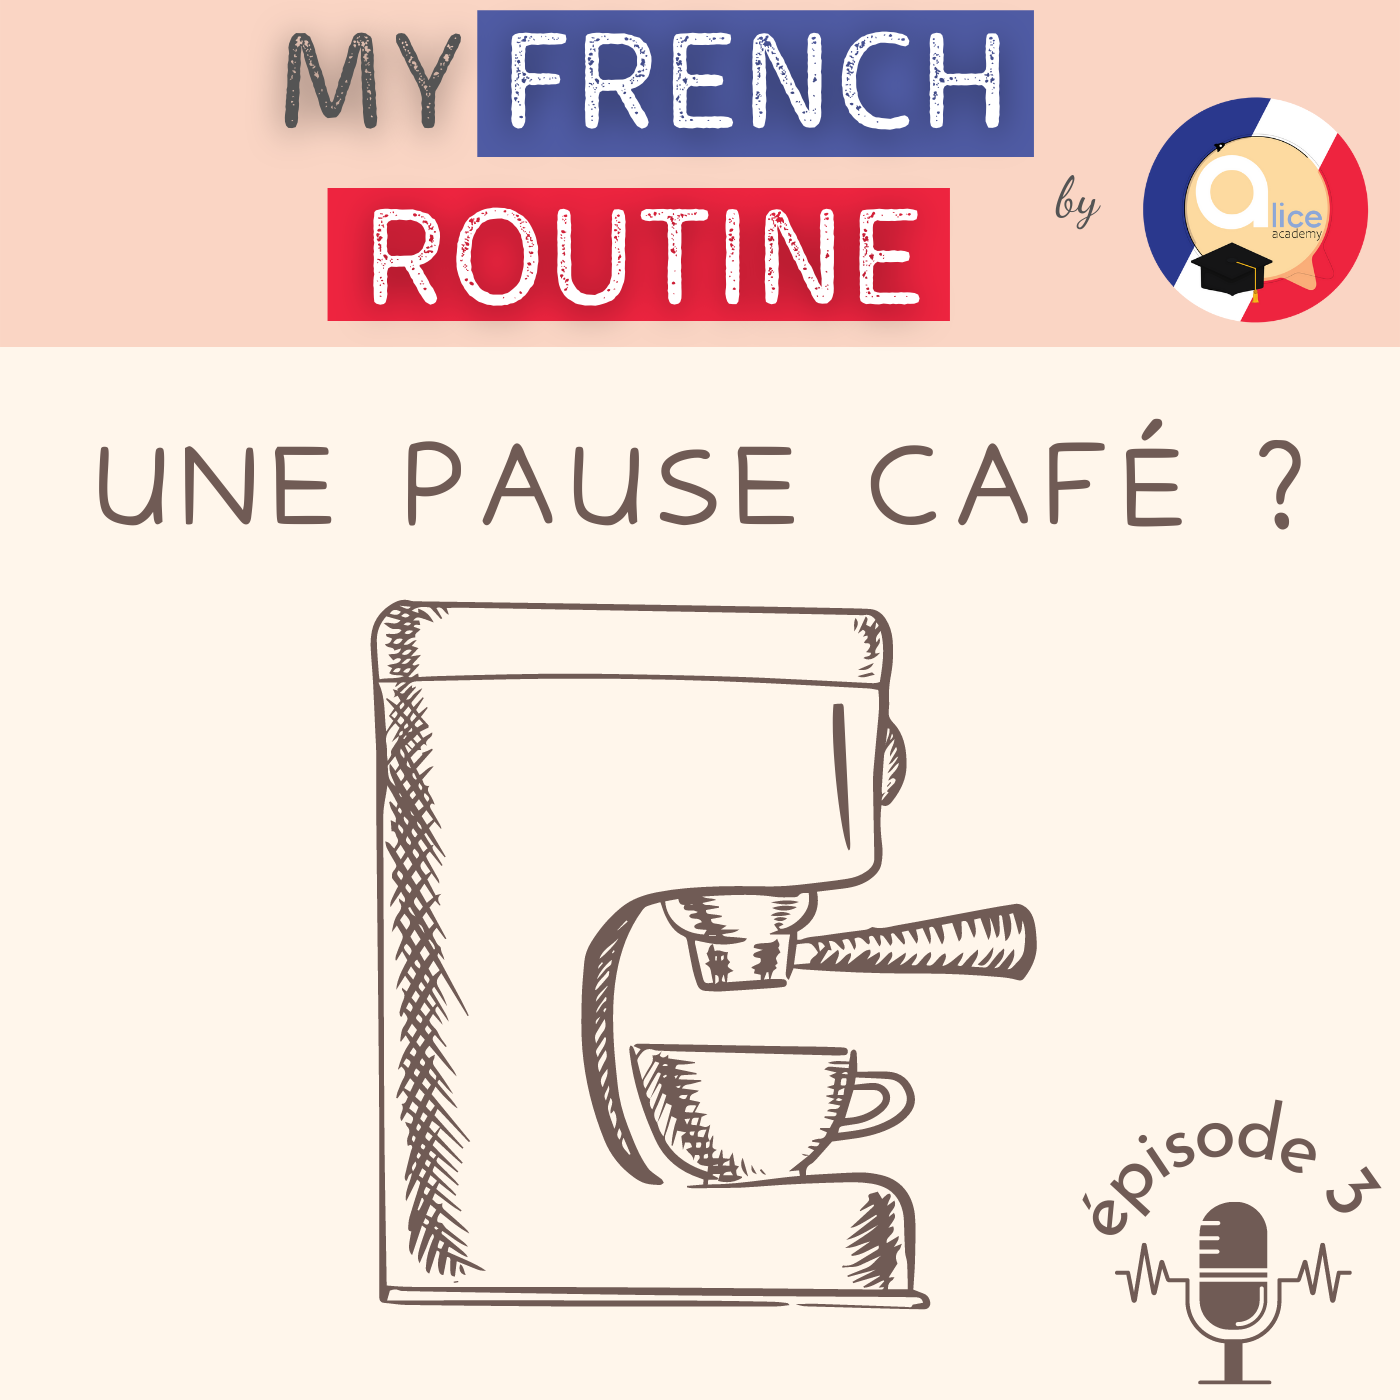 Une pause café - My French Routine